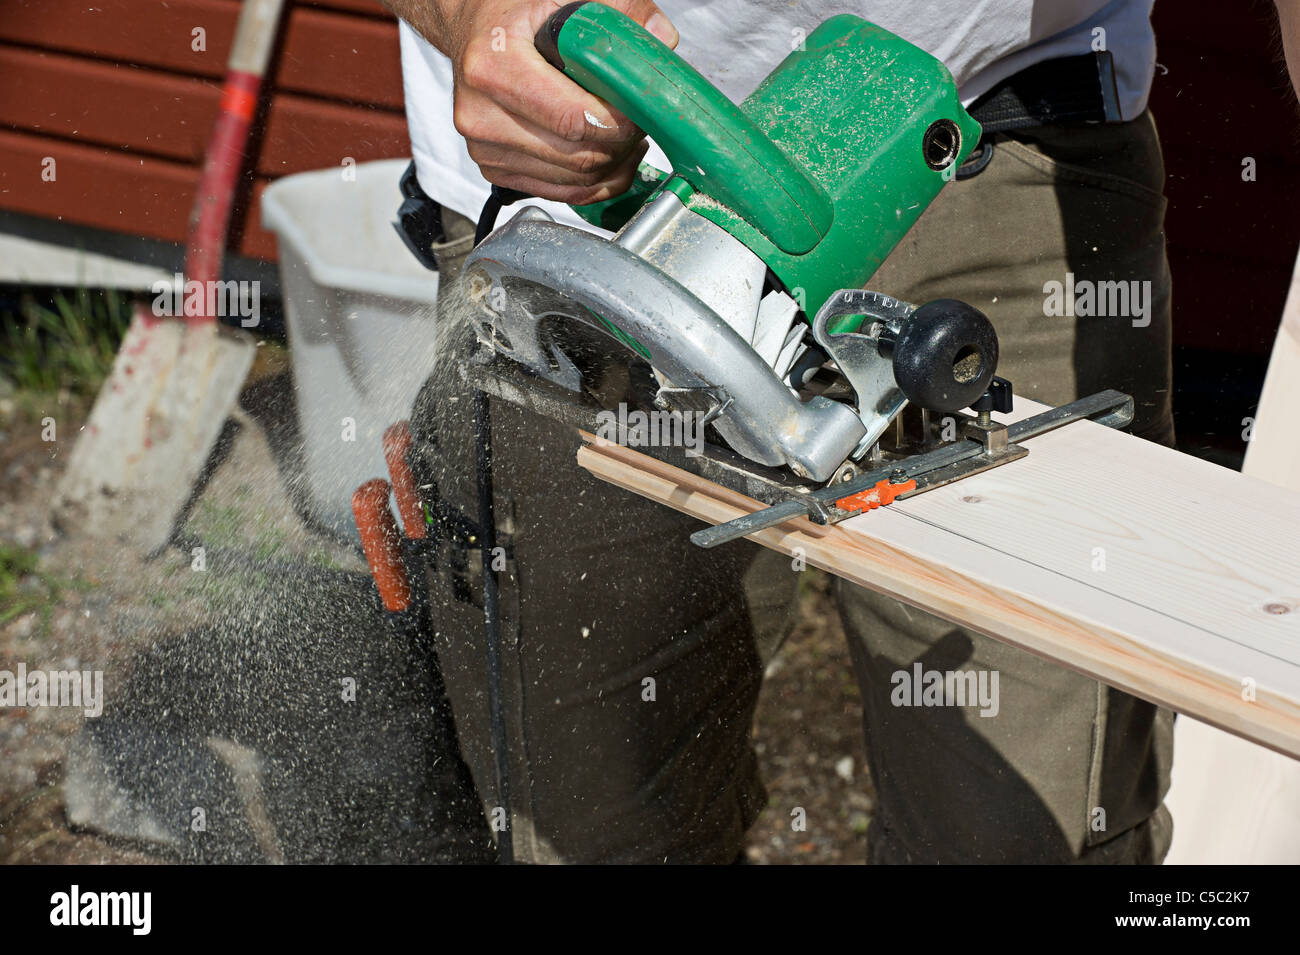 Close-up of a carpenter sawing board with a circular saw Stock Photo